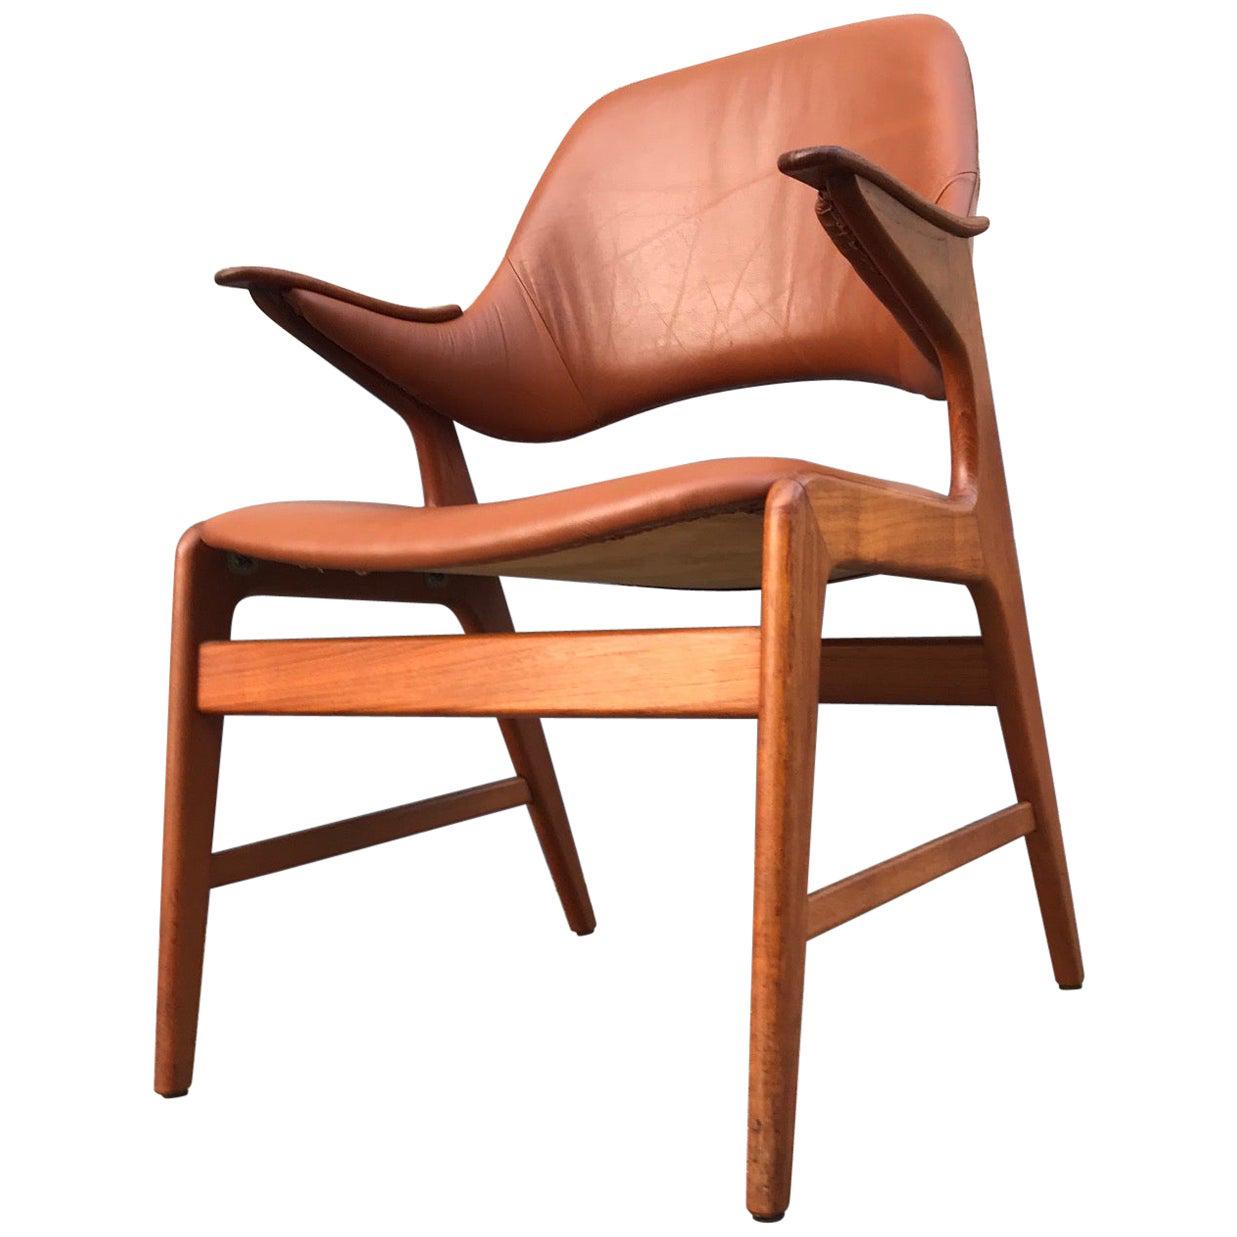 Danish Modern Teak and Leather Lounge Chair by N. A. Jørgensen, 1960s For Sale